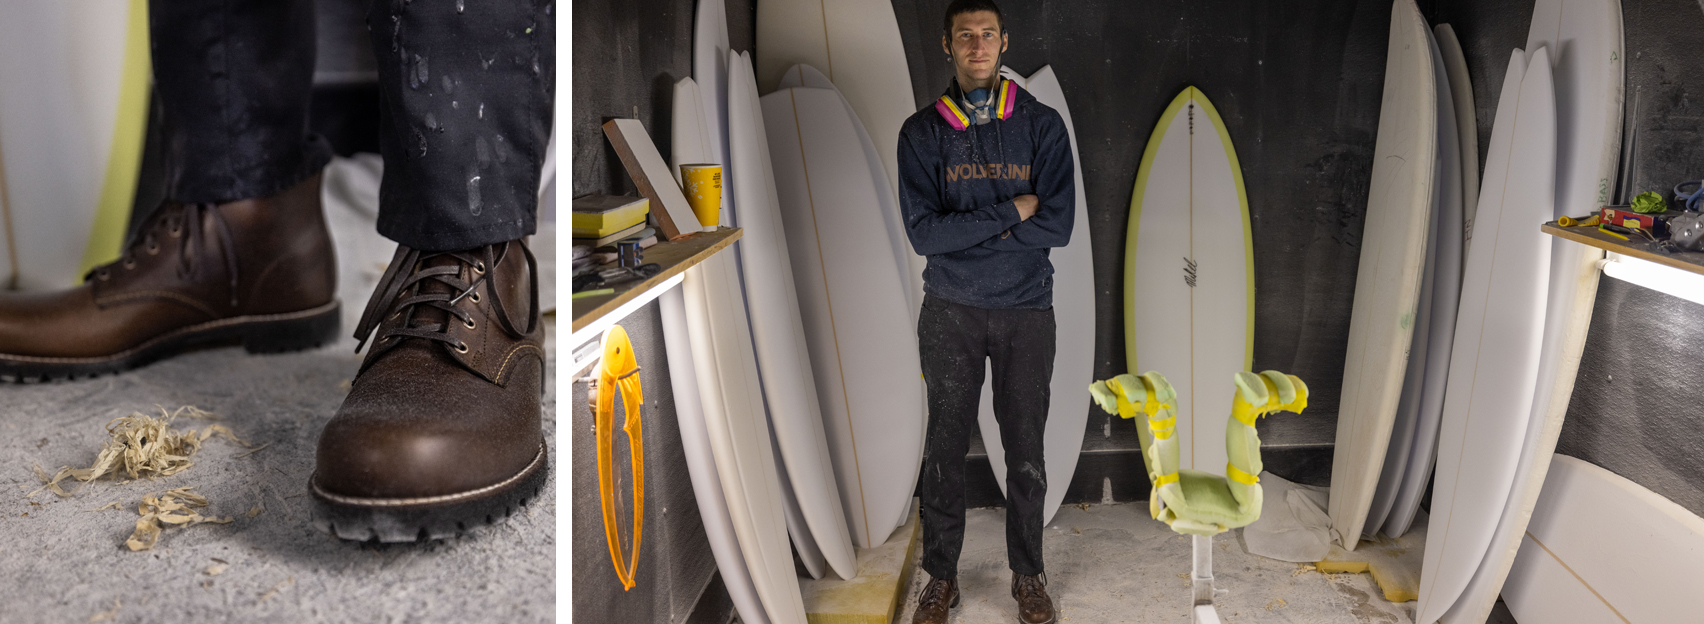 Mikel with surfboards.